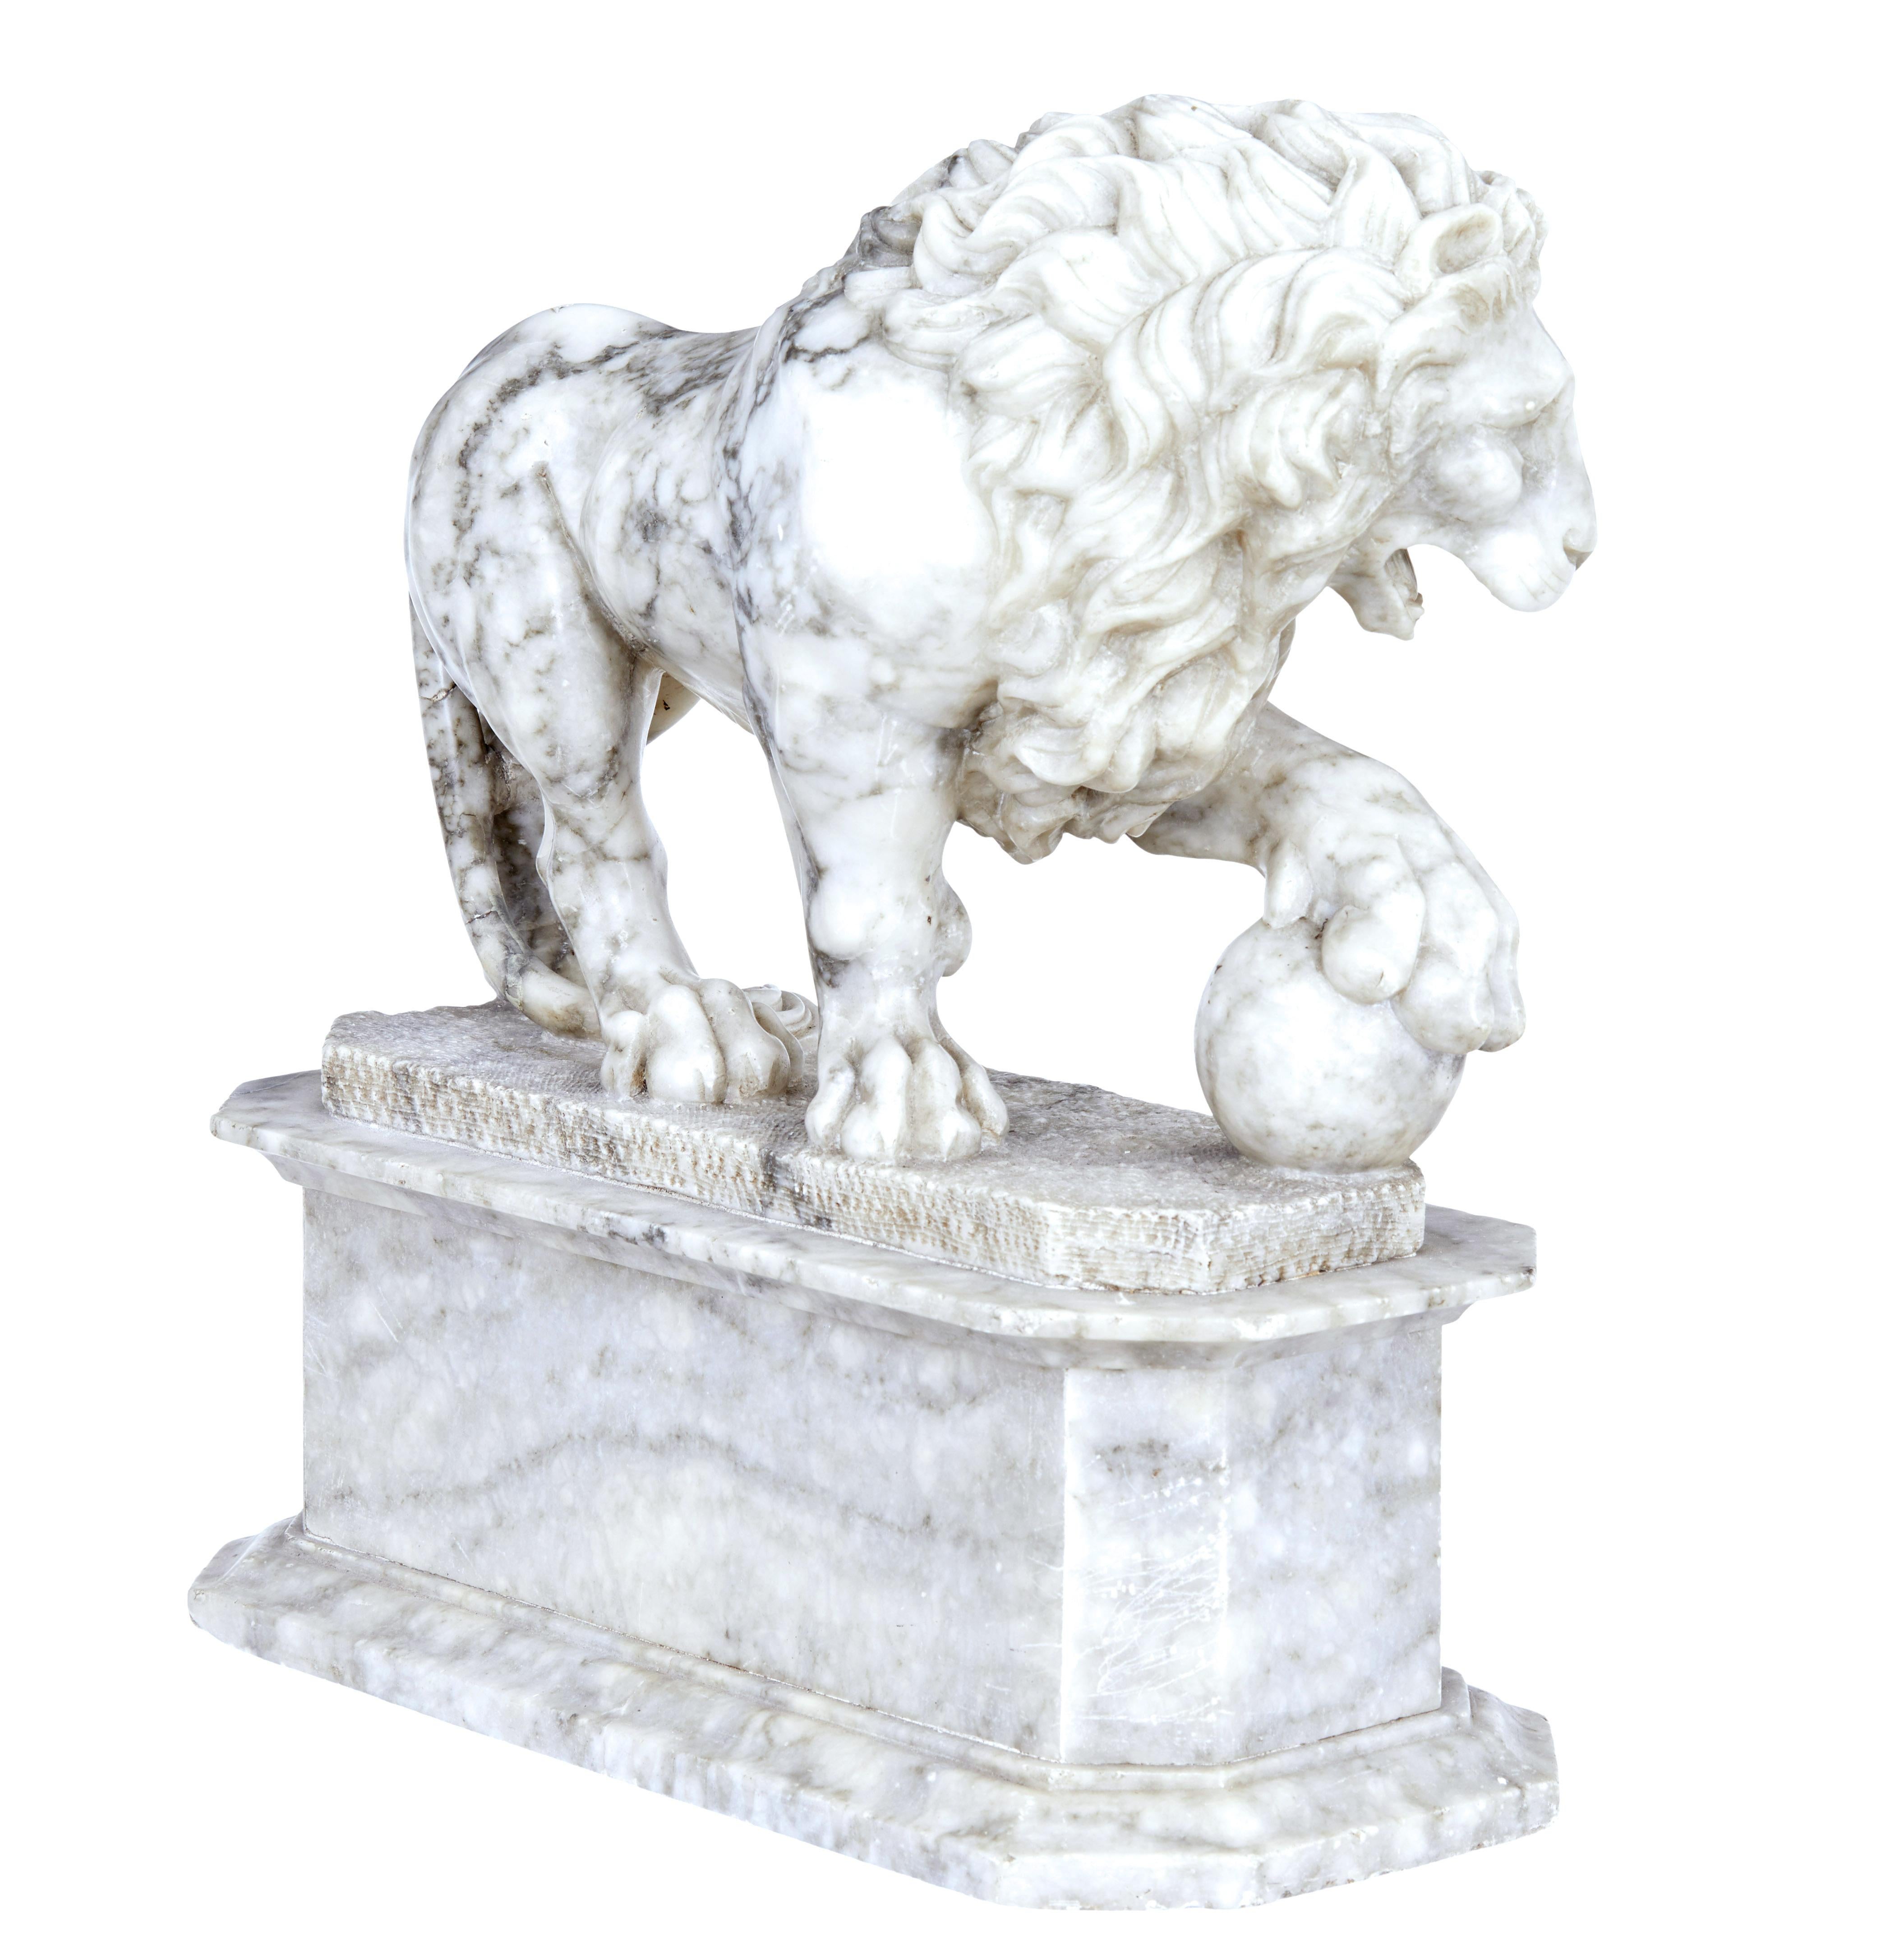 Hand-Carved Mid 19th Century Italian Marble Statue of a Lion